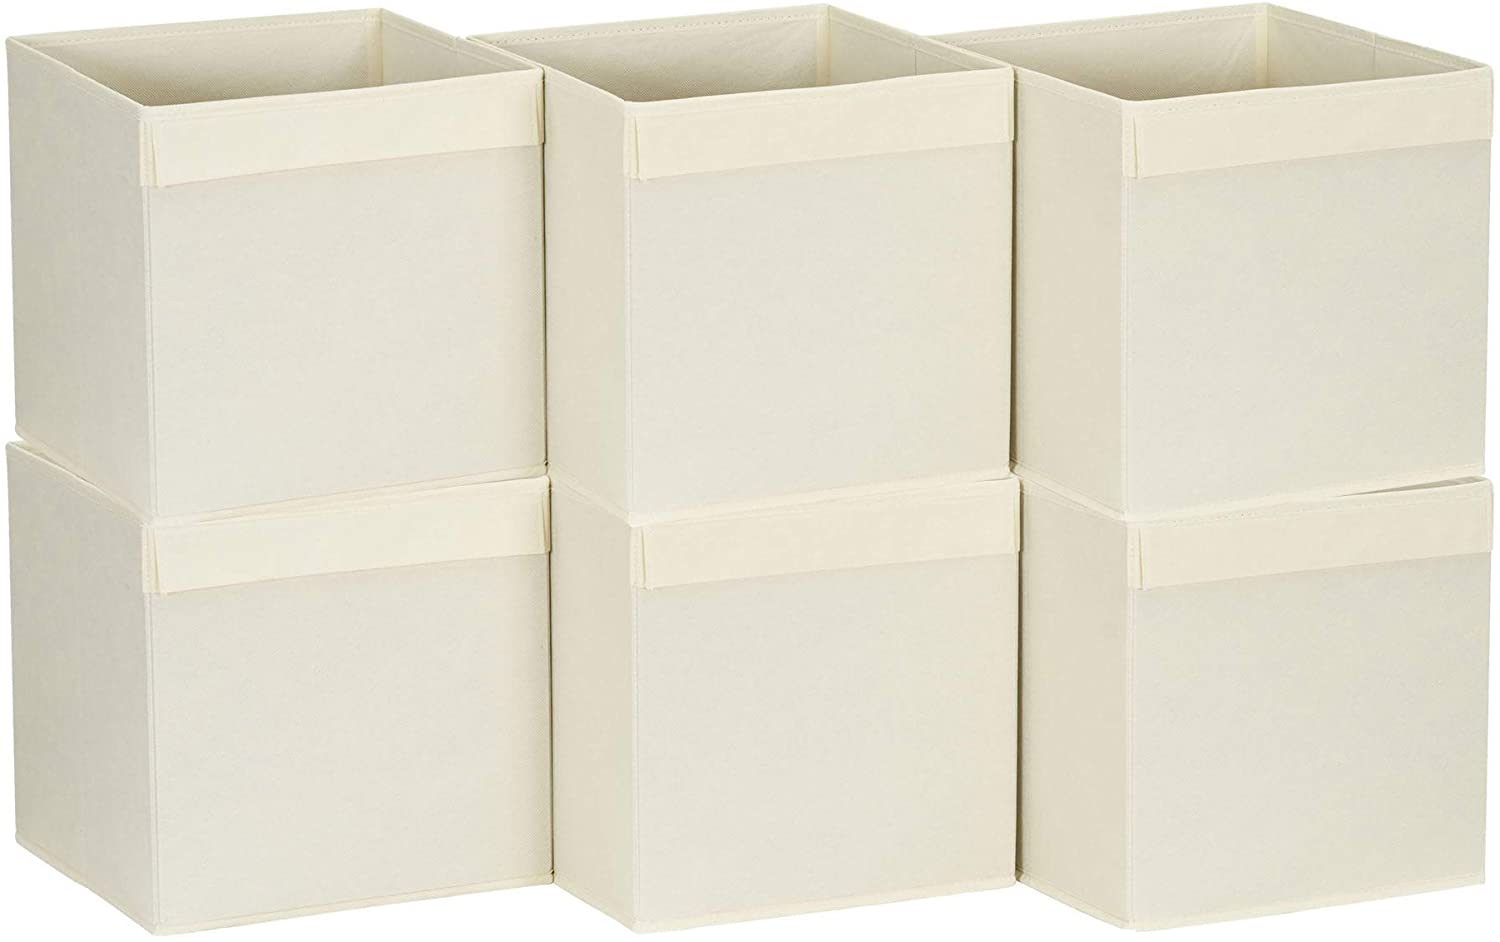 MISC Natural Color Fabric 11 inch Collapsible Cube (Set 6) Beige No Accessories